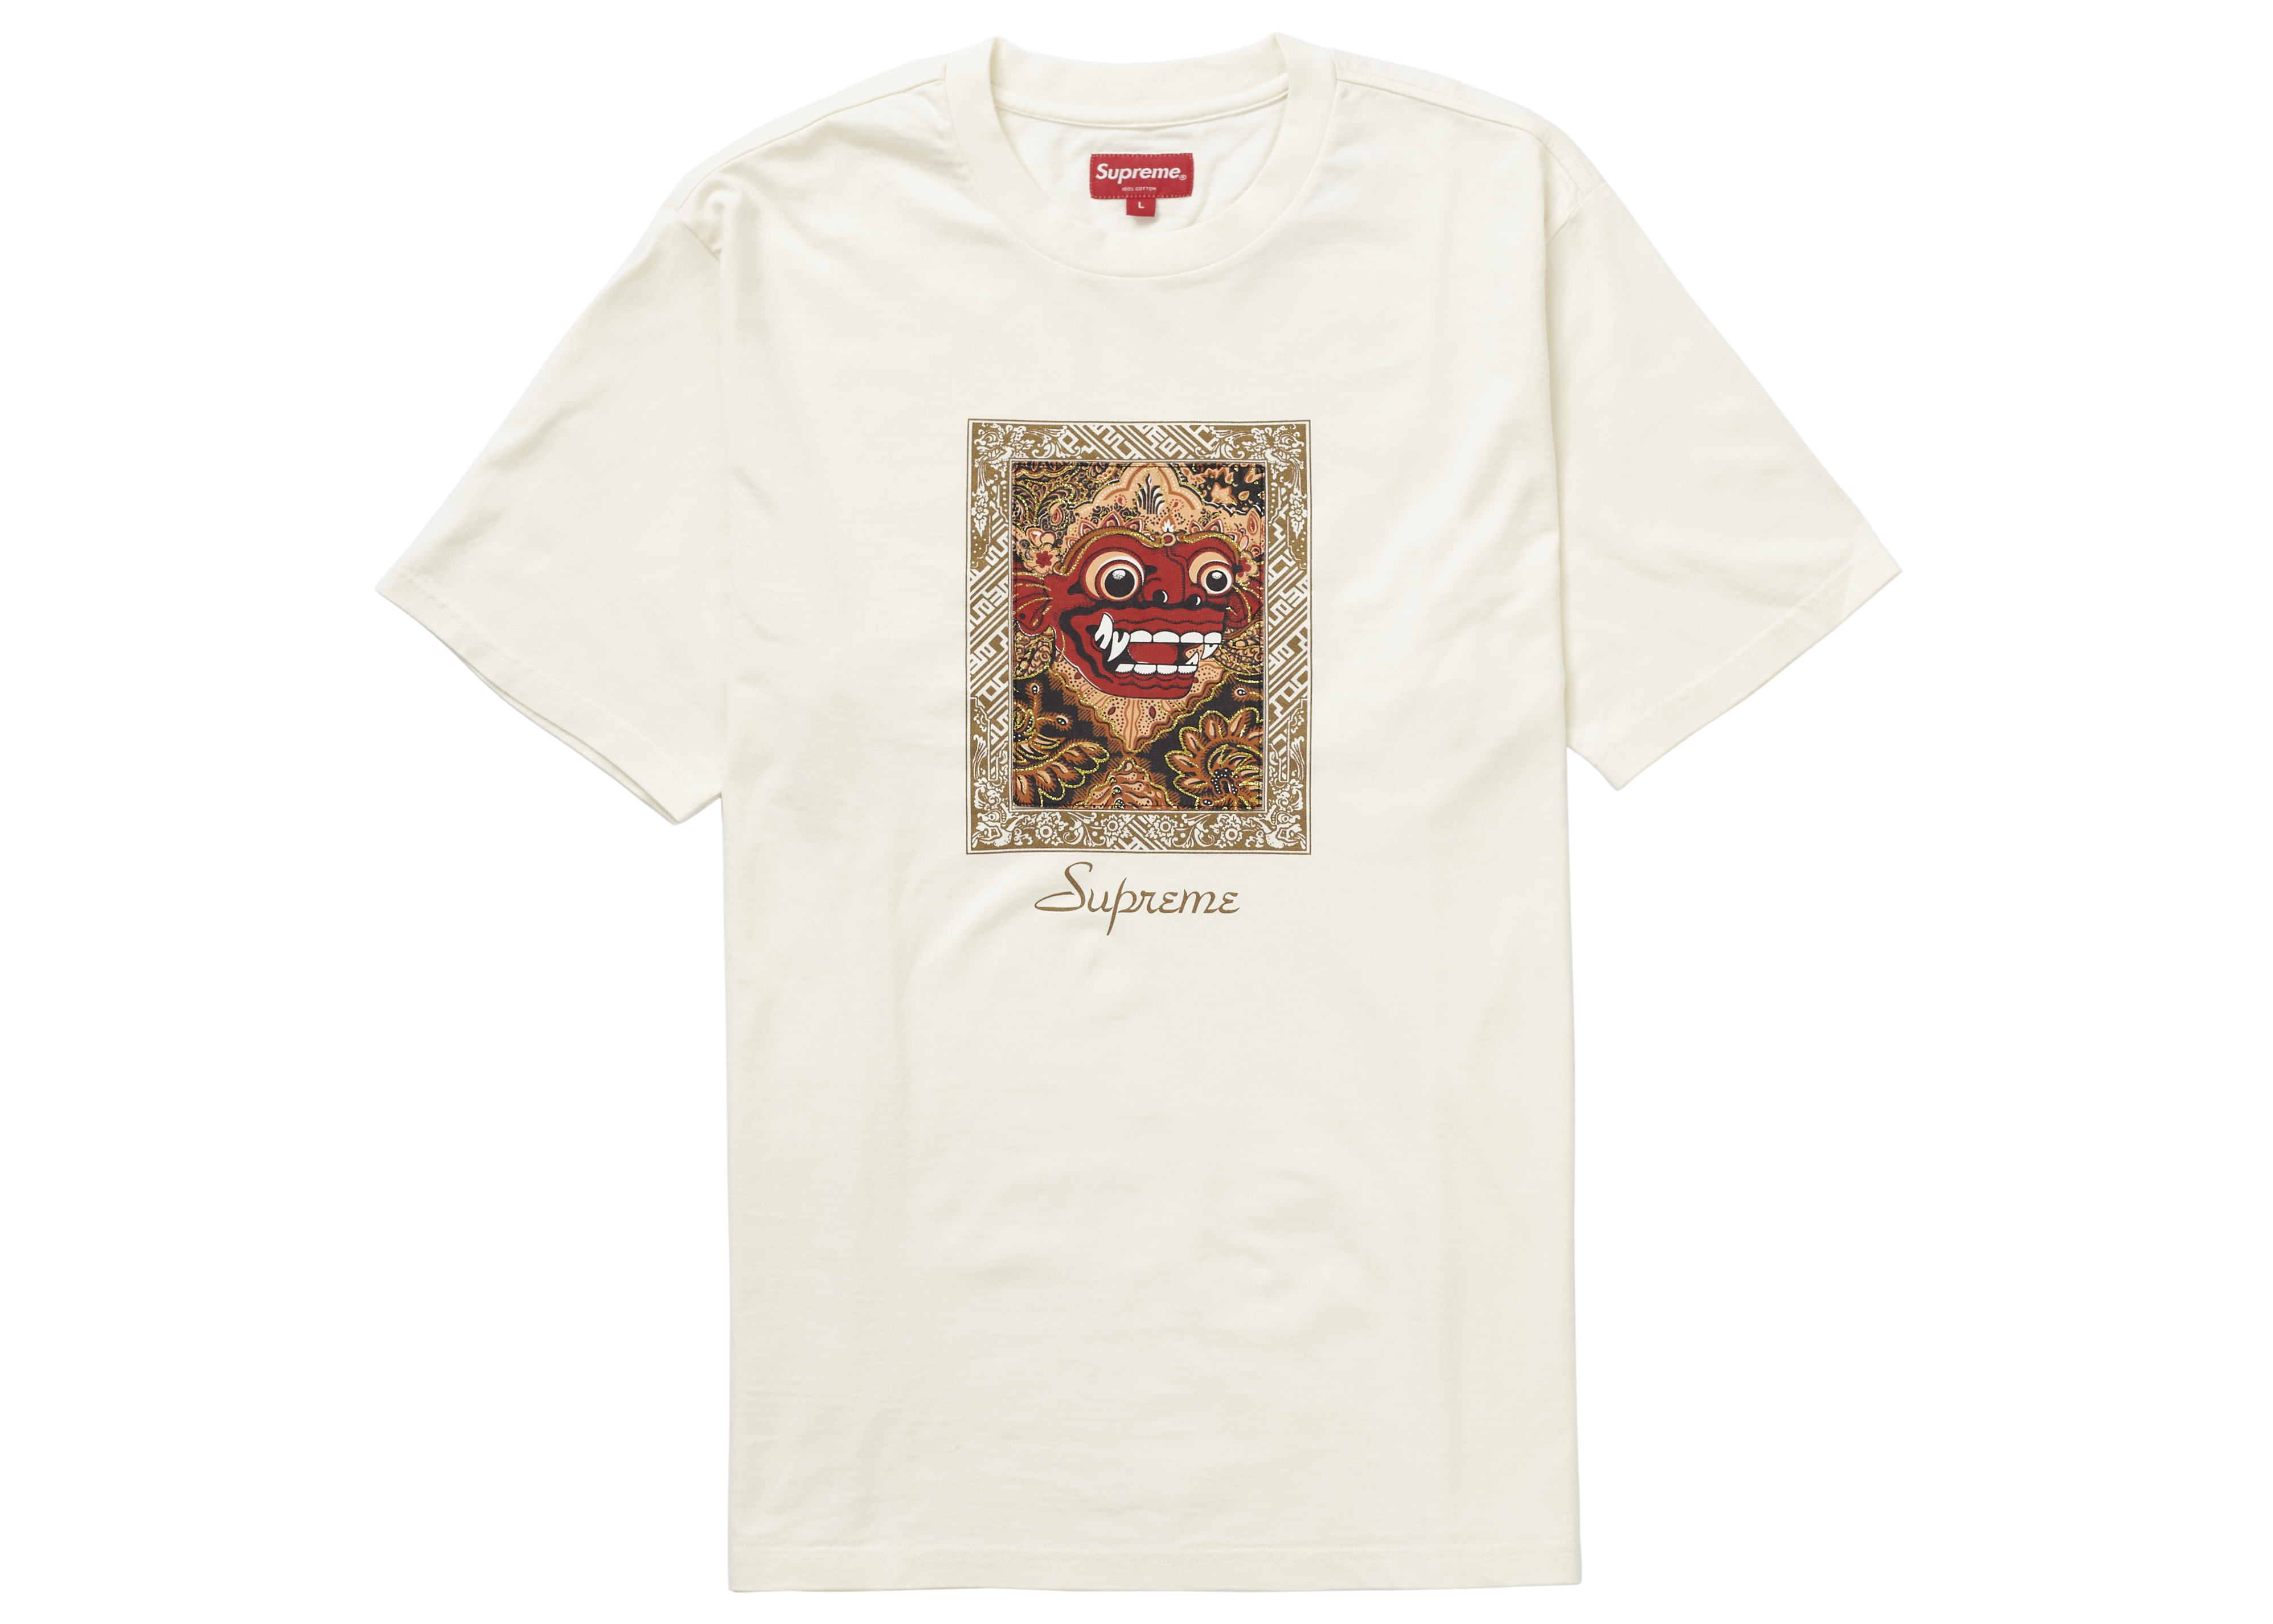 Supreme Barong Patch S/S Top Natural